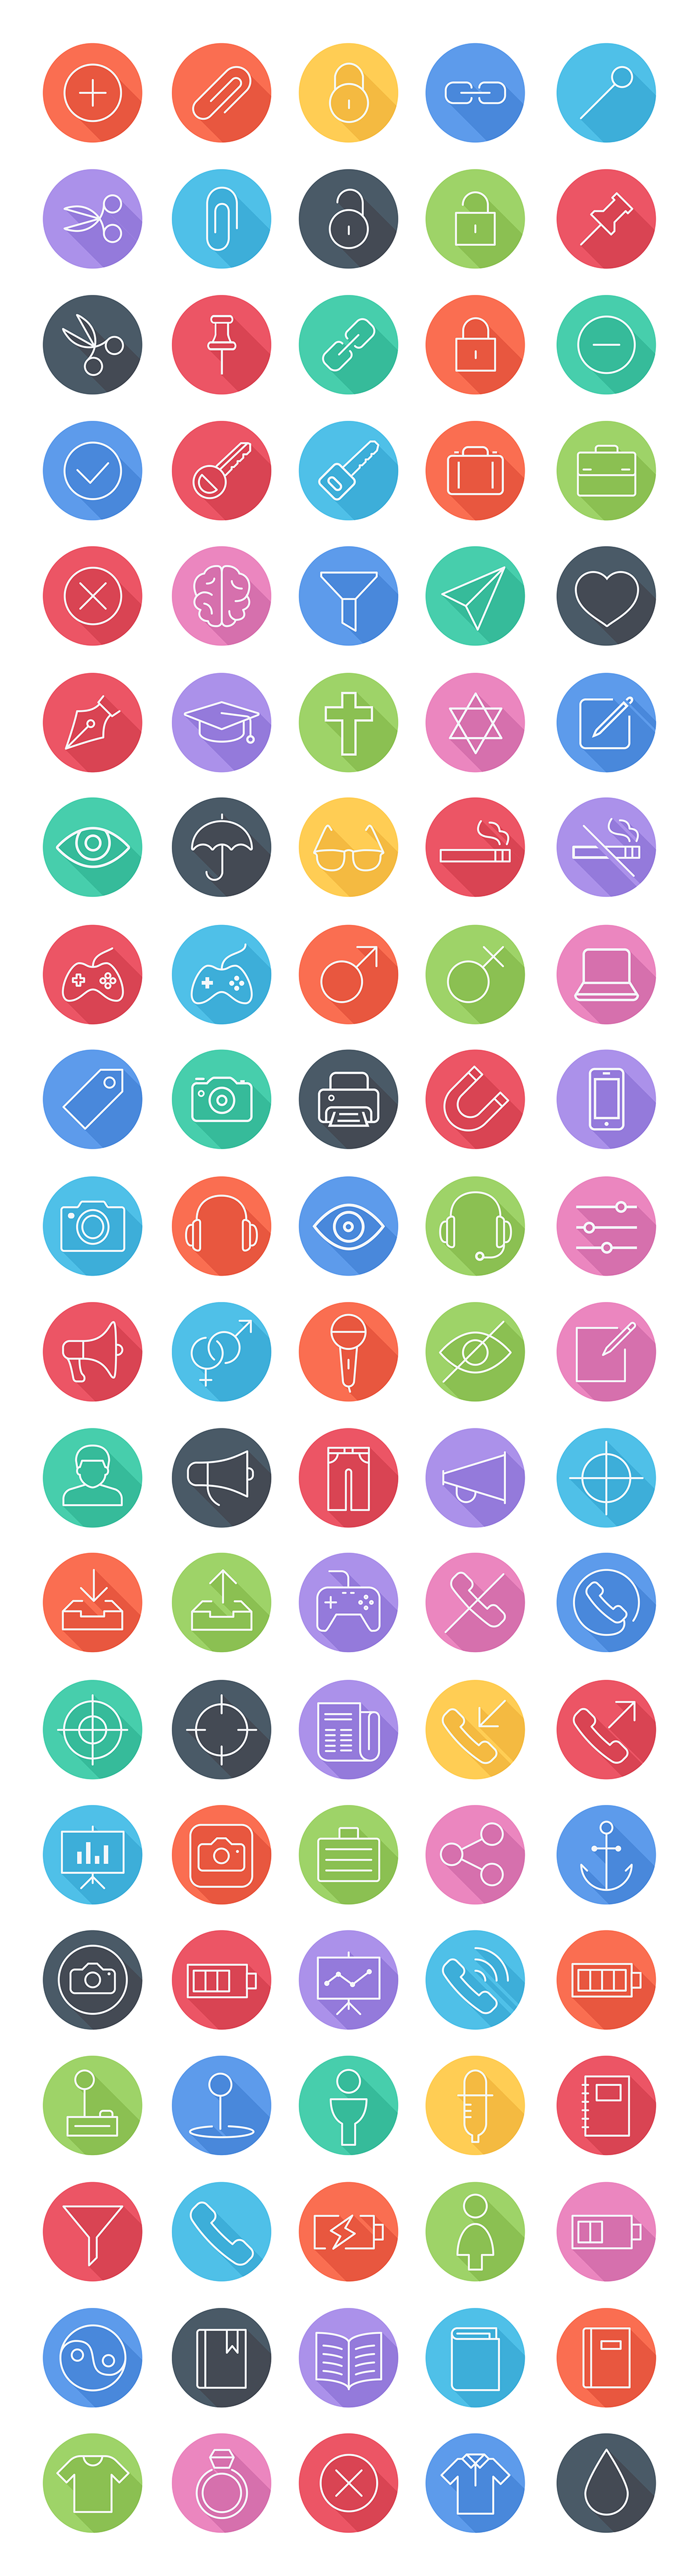 icons line icons flat icons vector app icons design Web mac free download